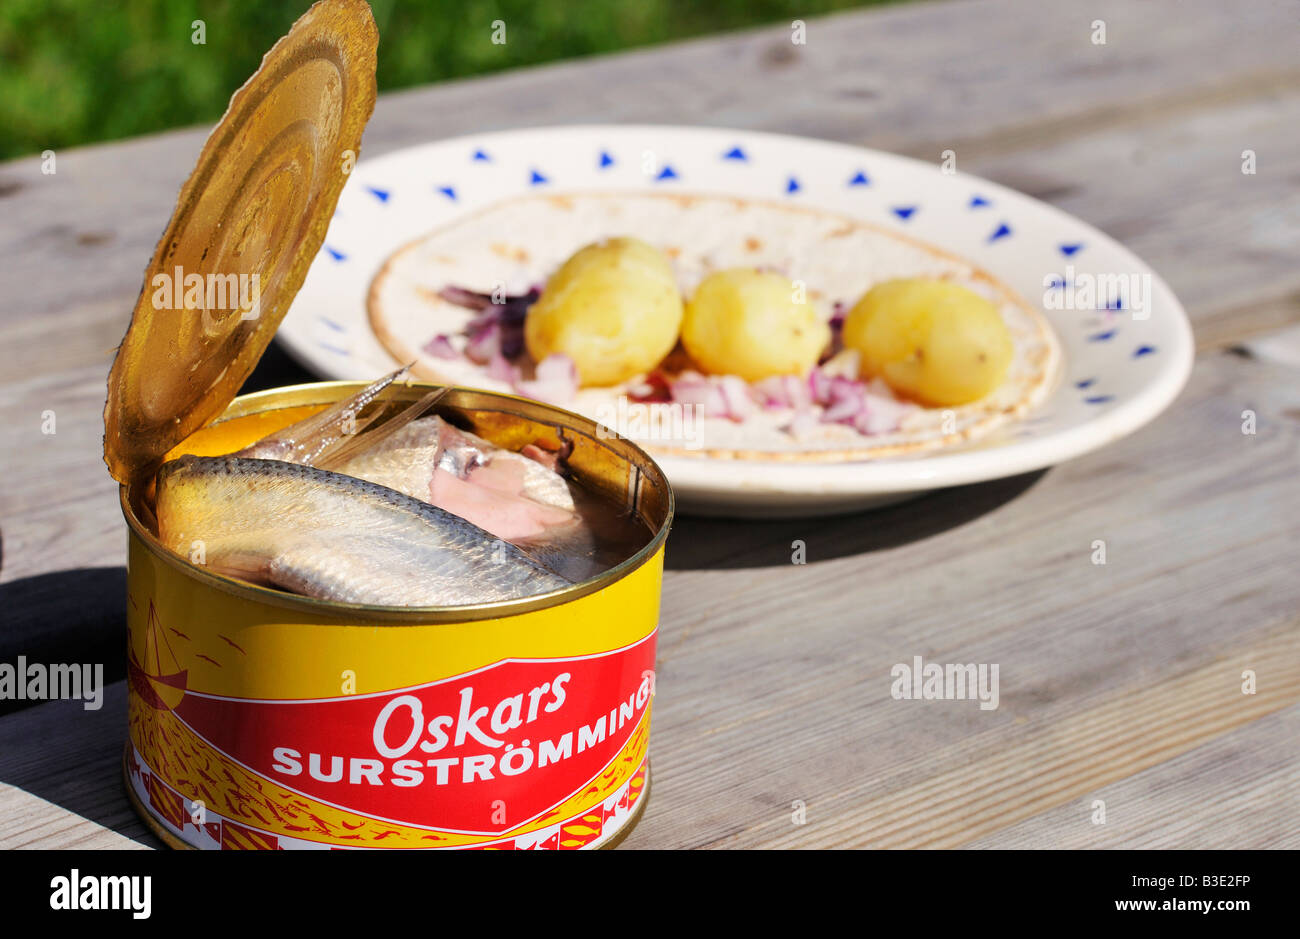 Surströmming  Local Preserved Herring From Sweden, Northern Europe